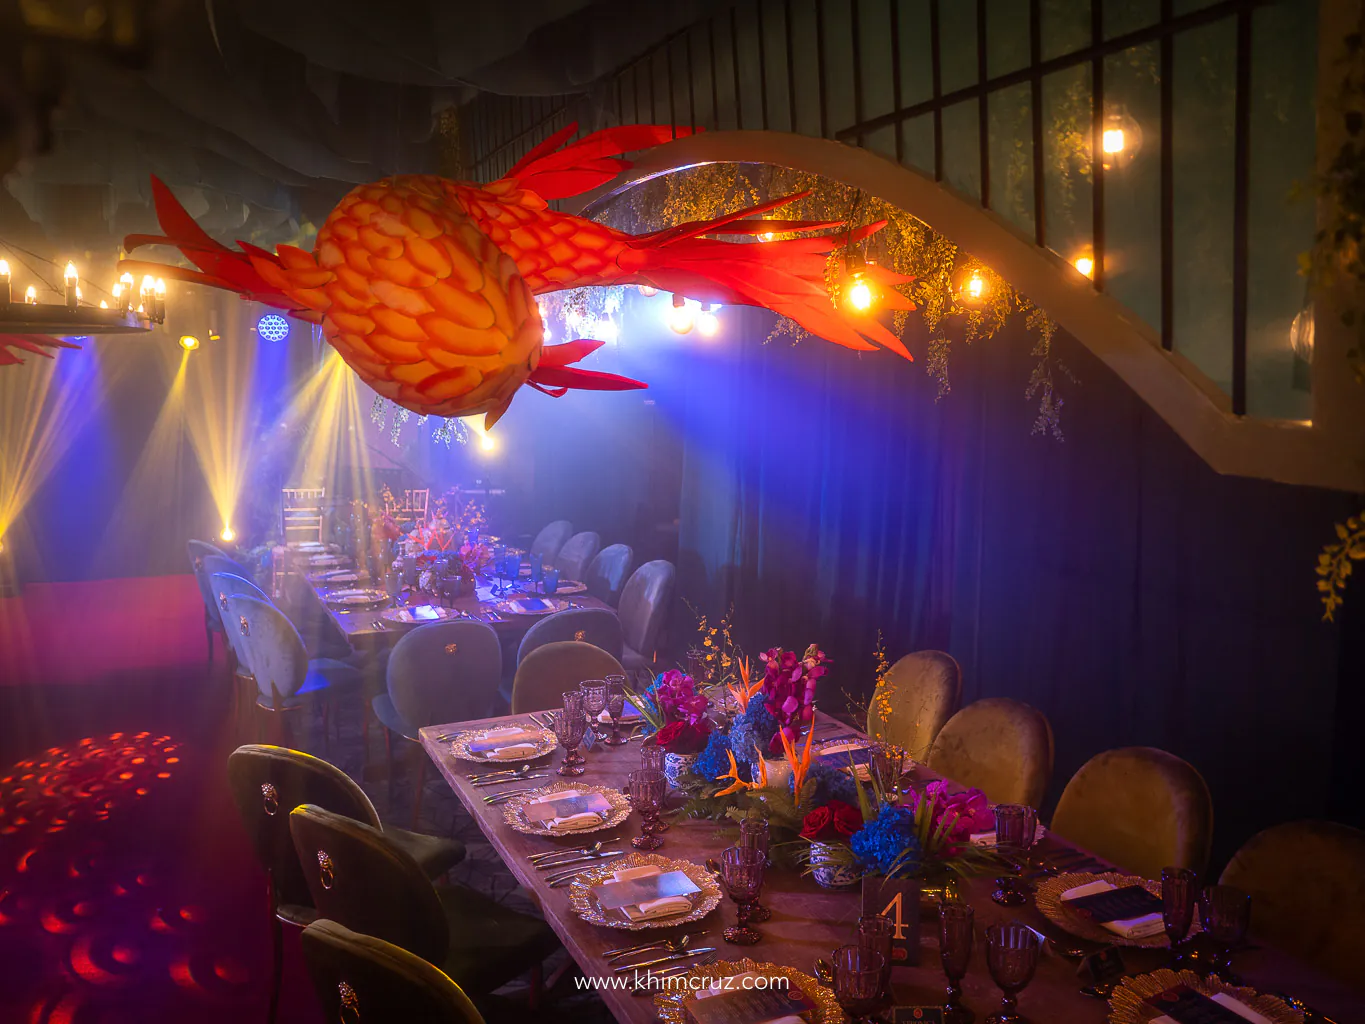 Koi fishes and arches on ceiling decor for this industrial Oriental celebration